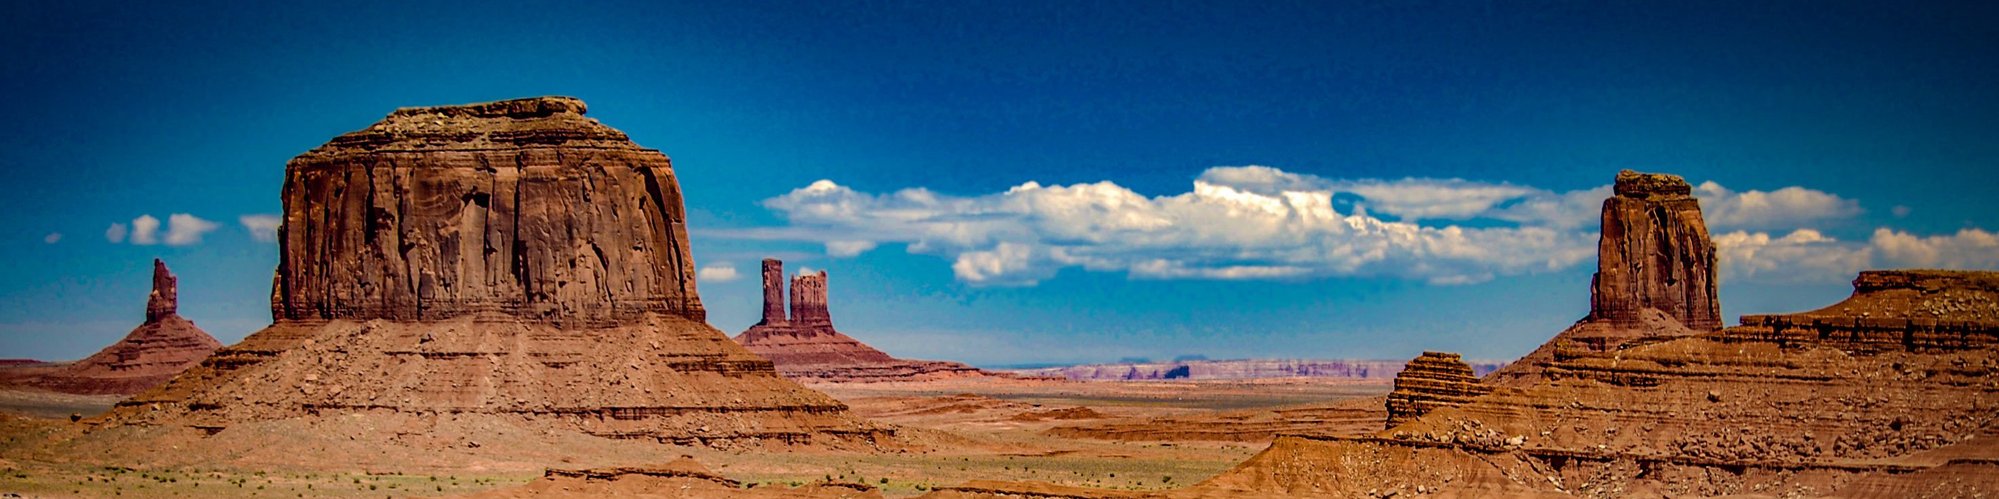 A high quality print available to buy of Monument Valley in Colorado.